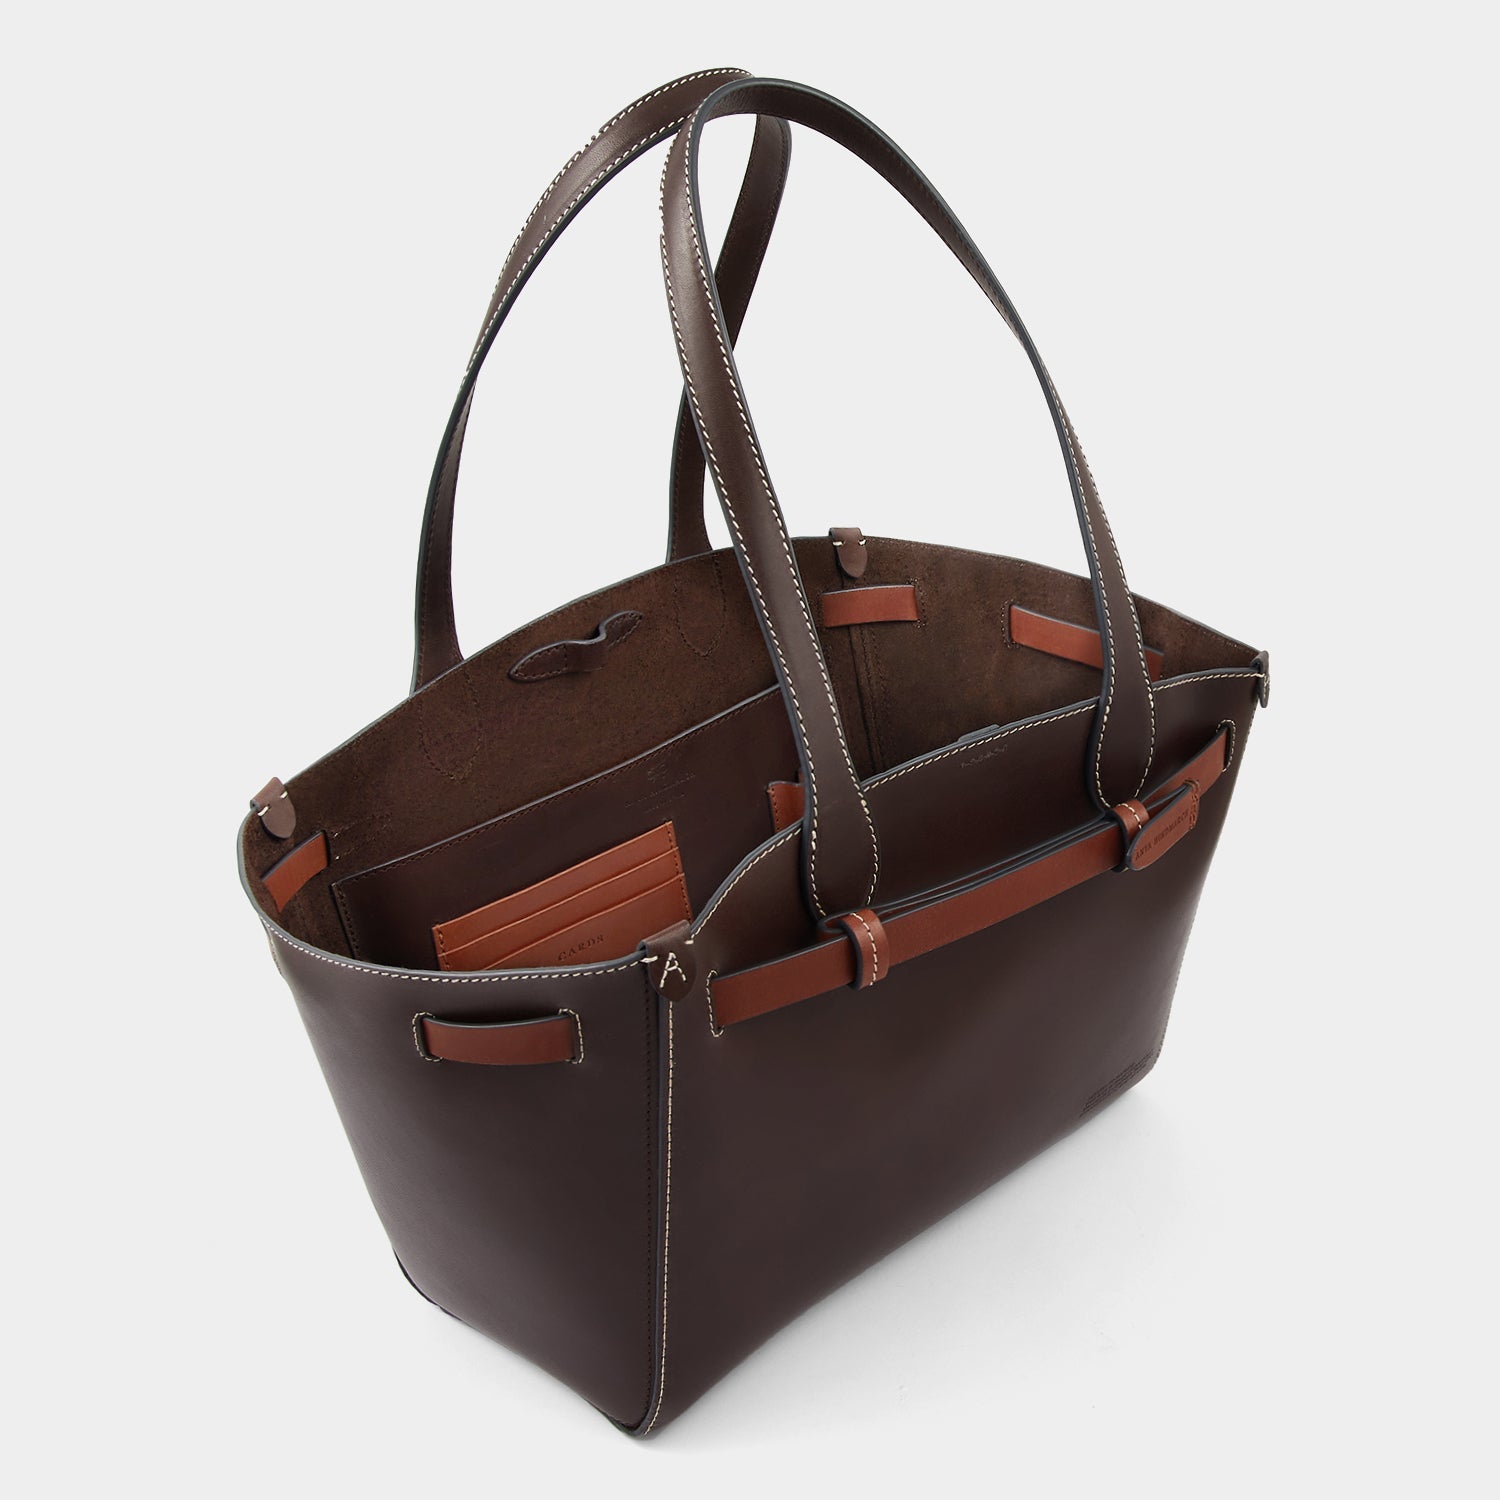 Return to Nature Tote Small